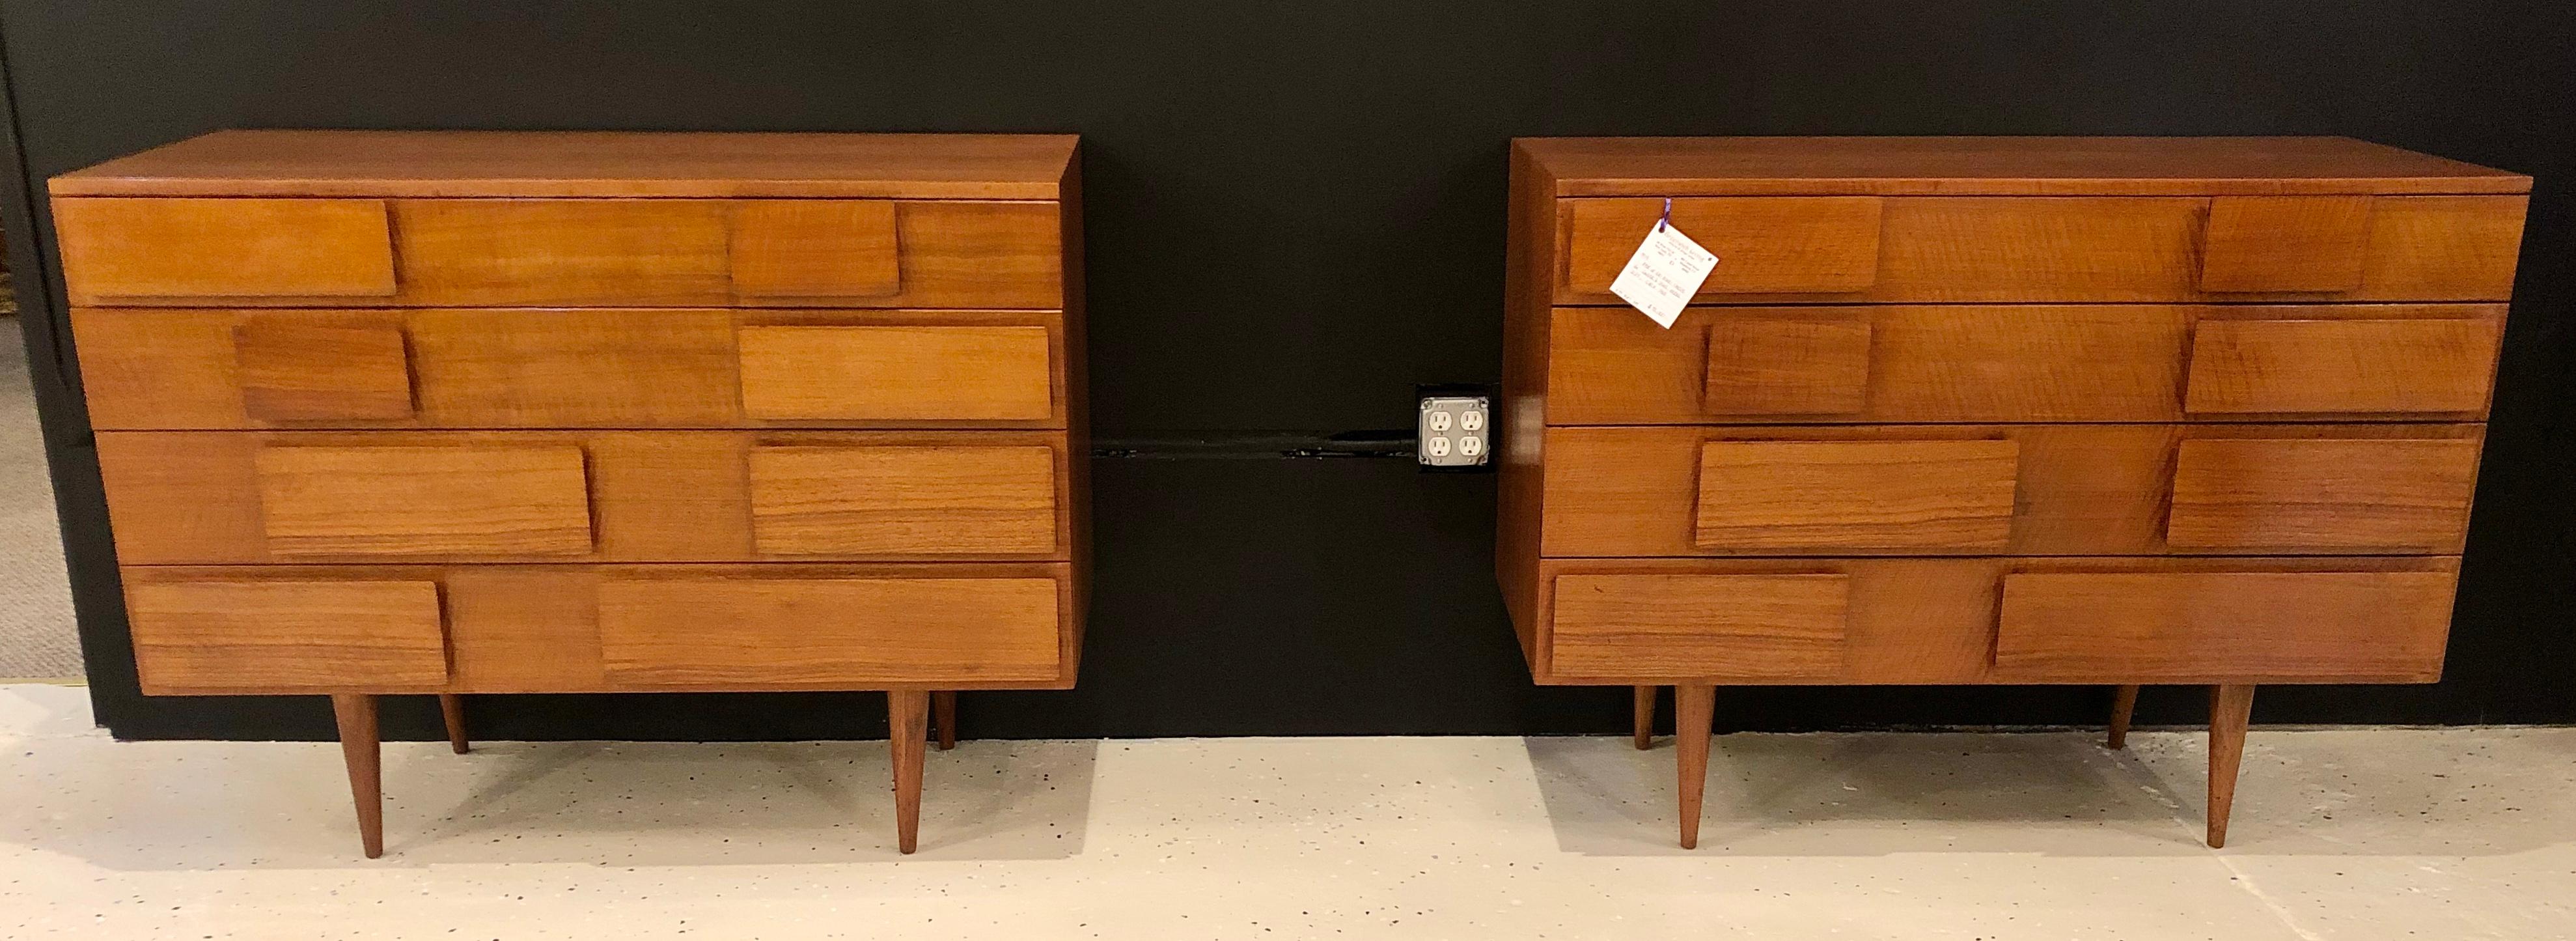 Italian Pair of Gio Ponti Chests for Singer & Sons, Model 2129, circa 1955